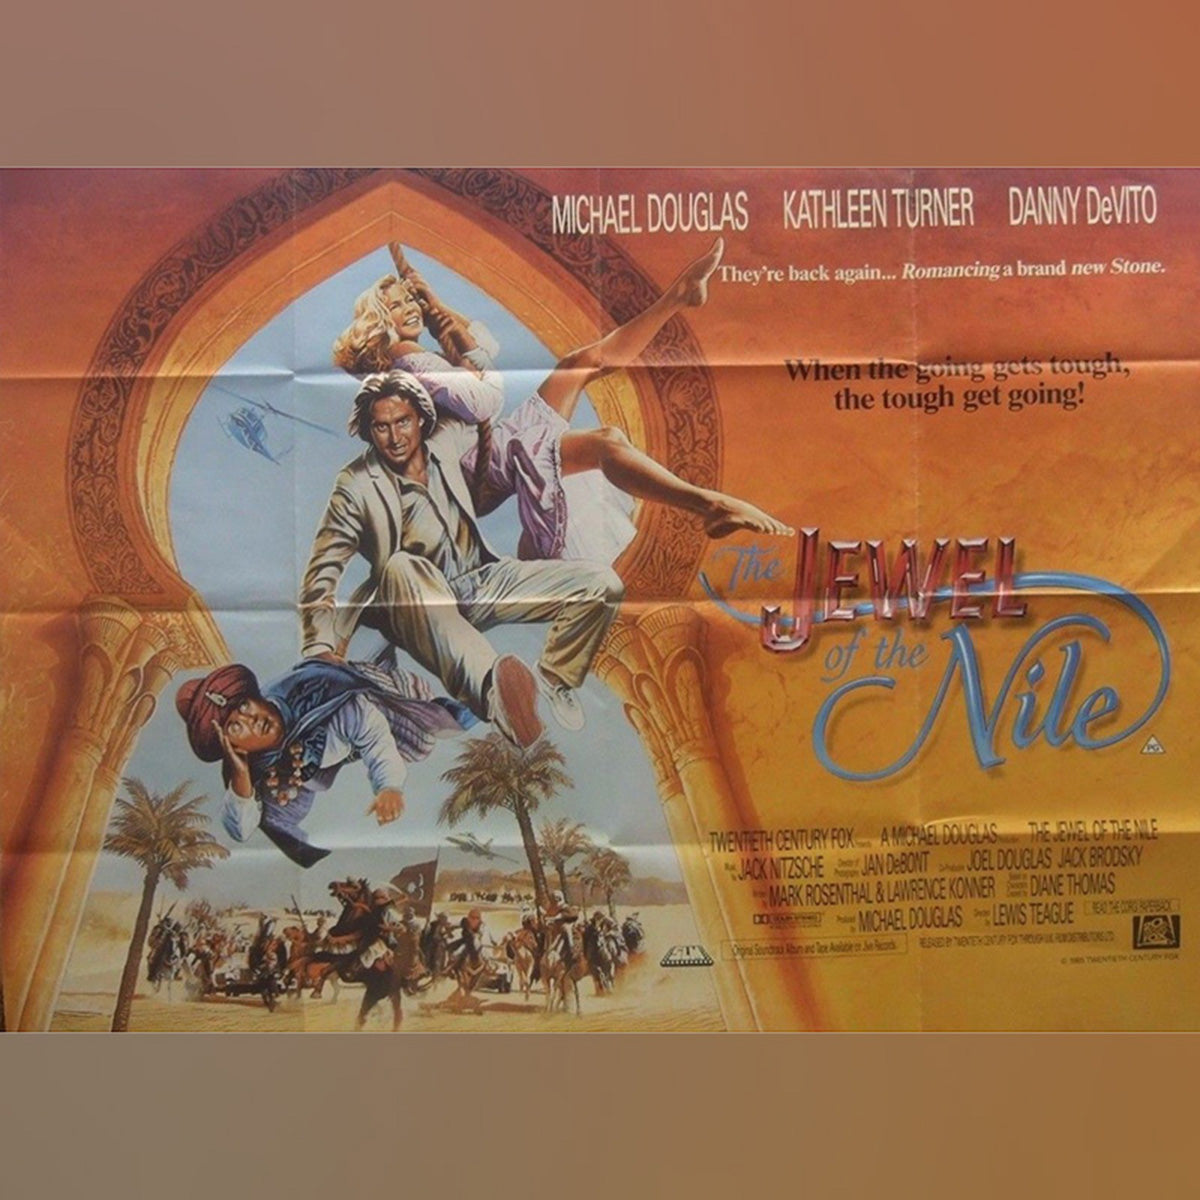 Original Movie Poster of Jewel Of The Nile, The (1985)